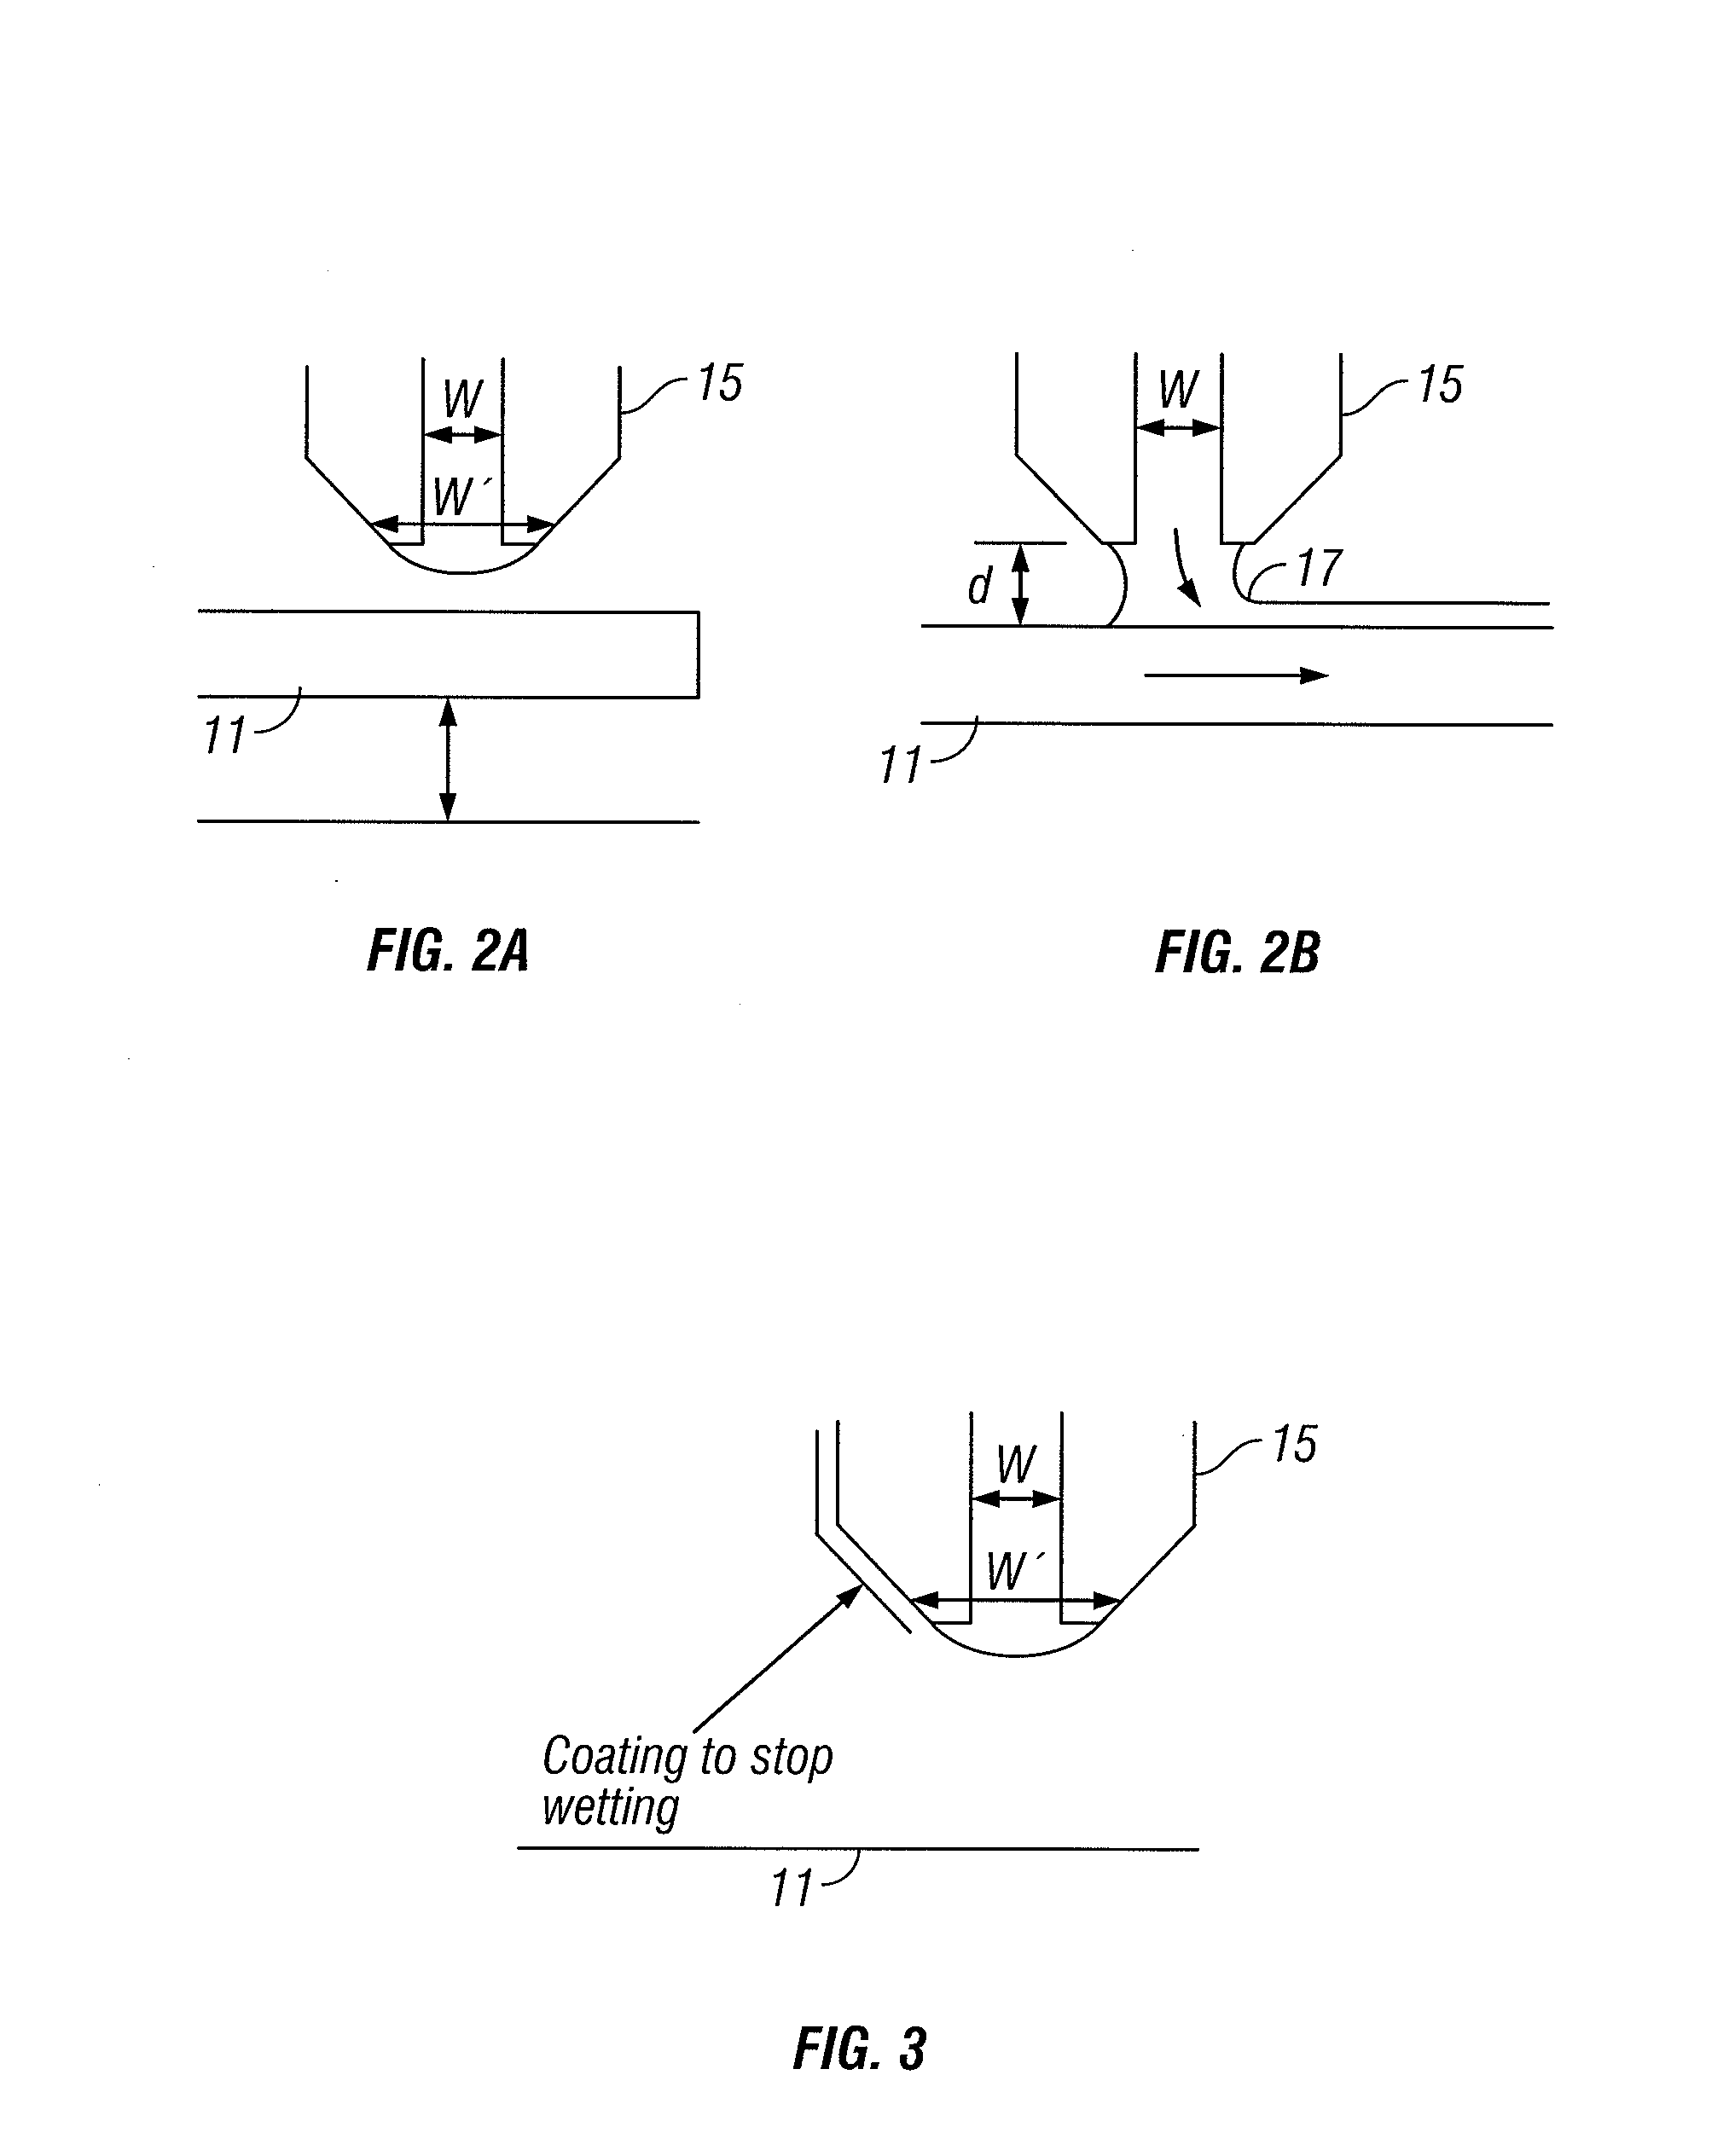 Method for Rapid Liquid Phase Deposition of Crystalline Si Thin Films on Large Glass Substrates for Solar Cell Applications